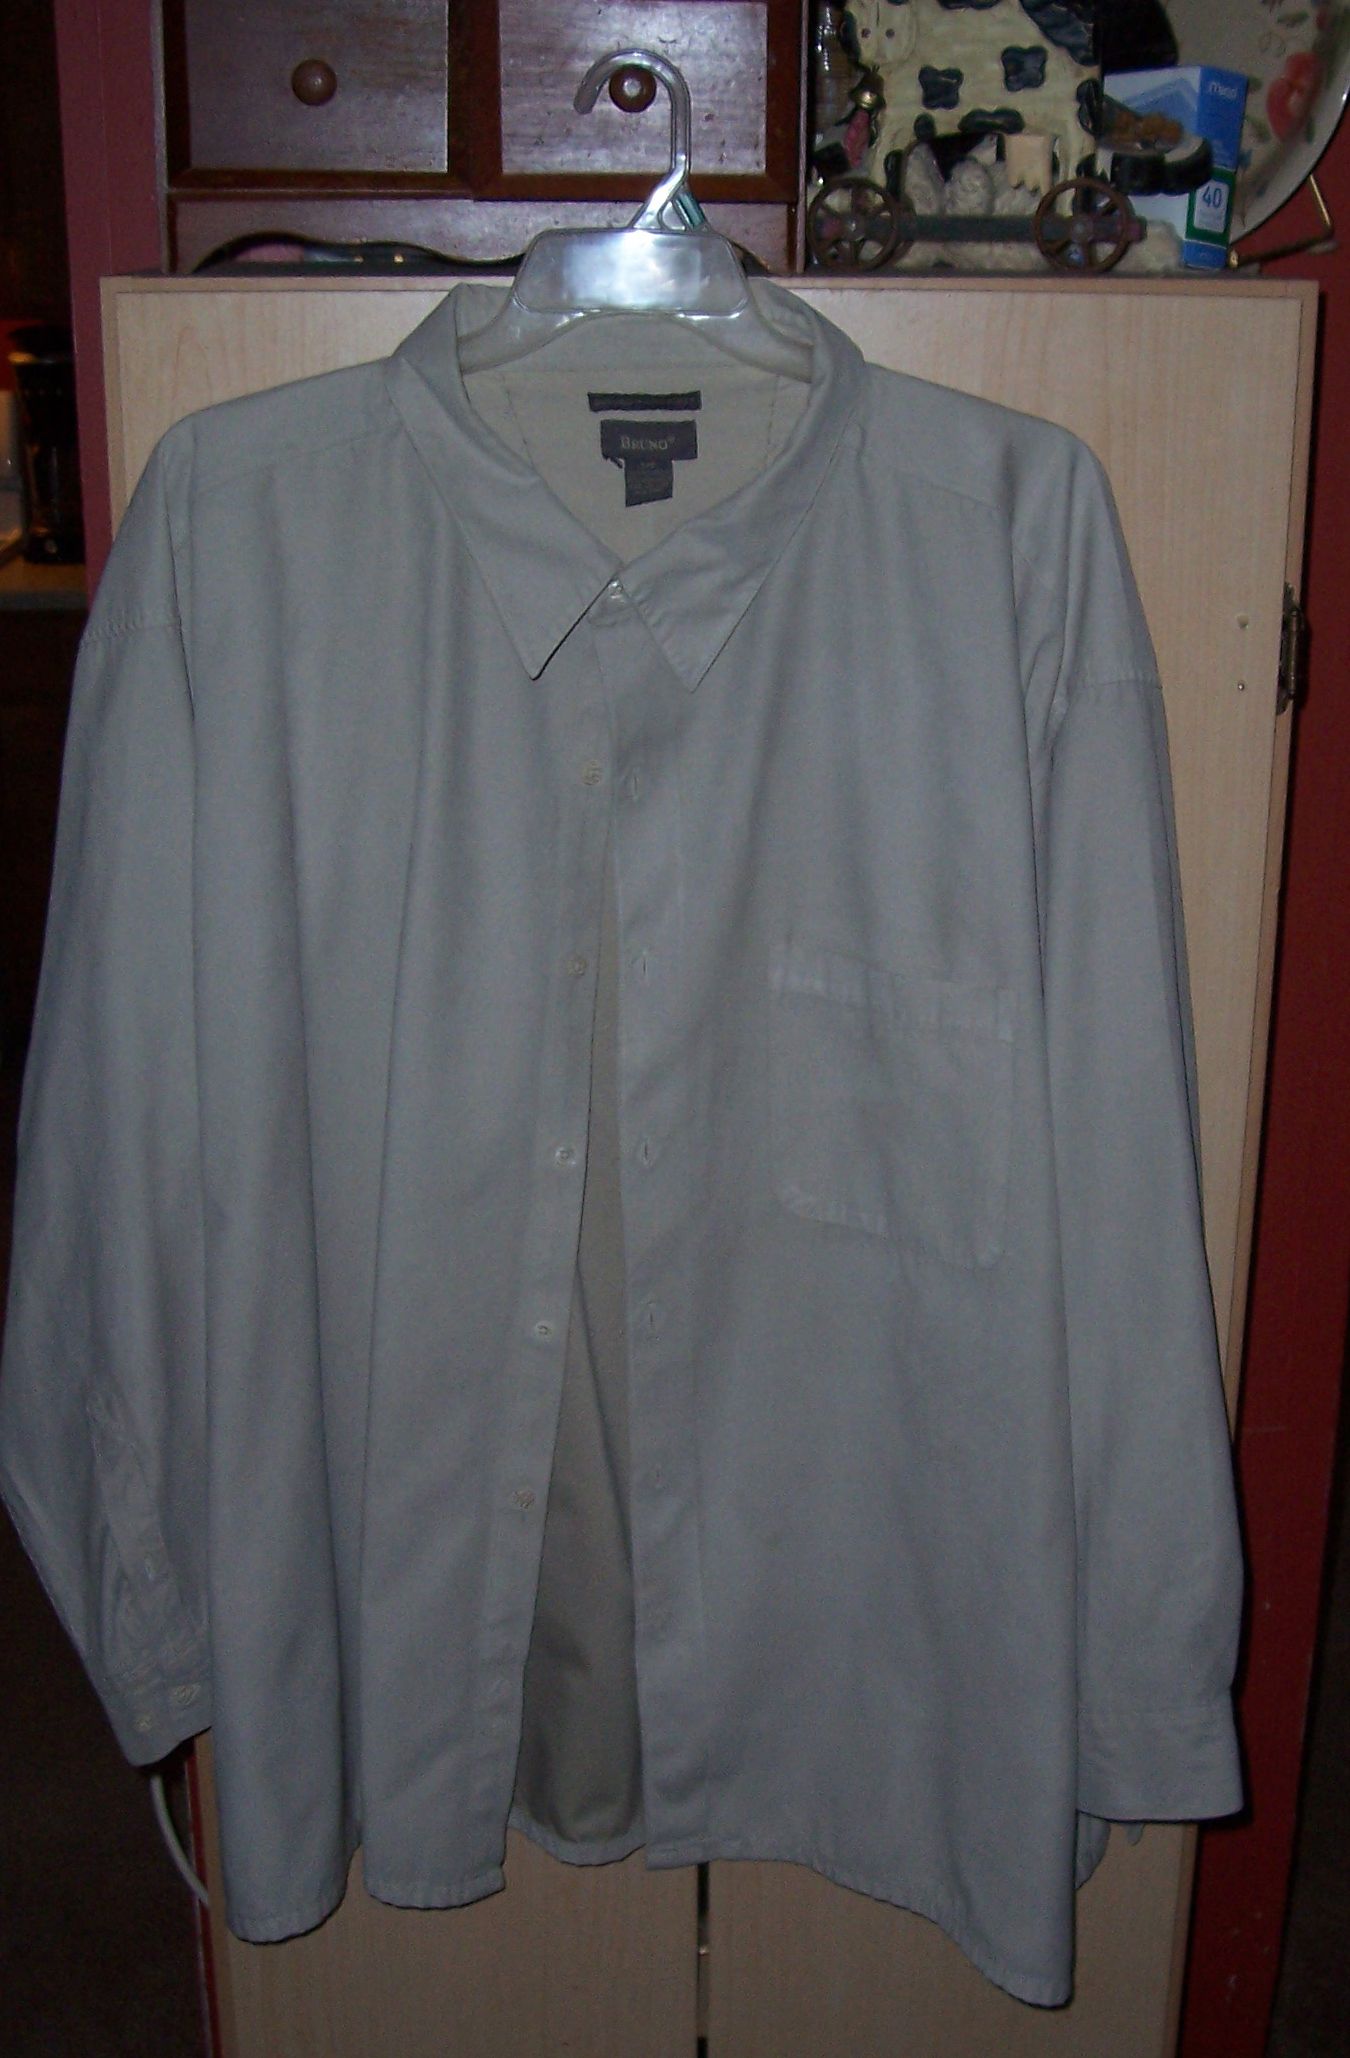 Bruna 5x button up mens shirt one button is missing fell off in washer 